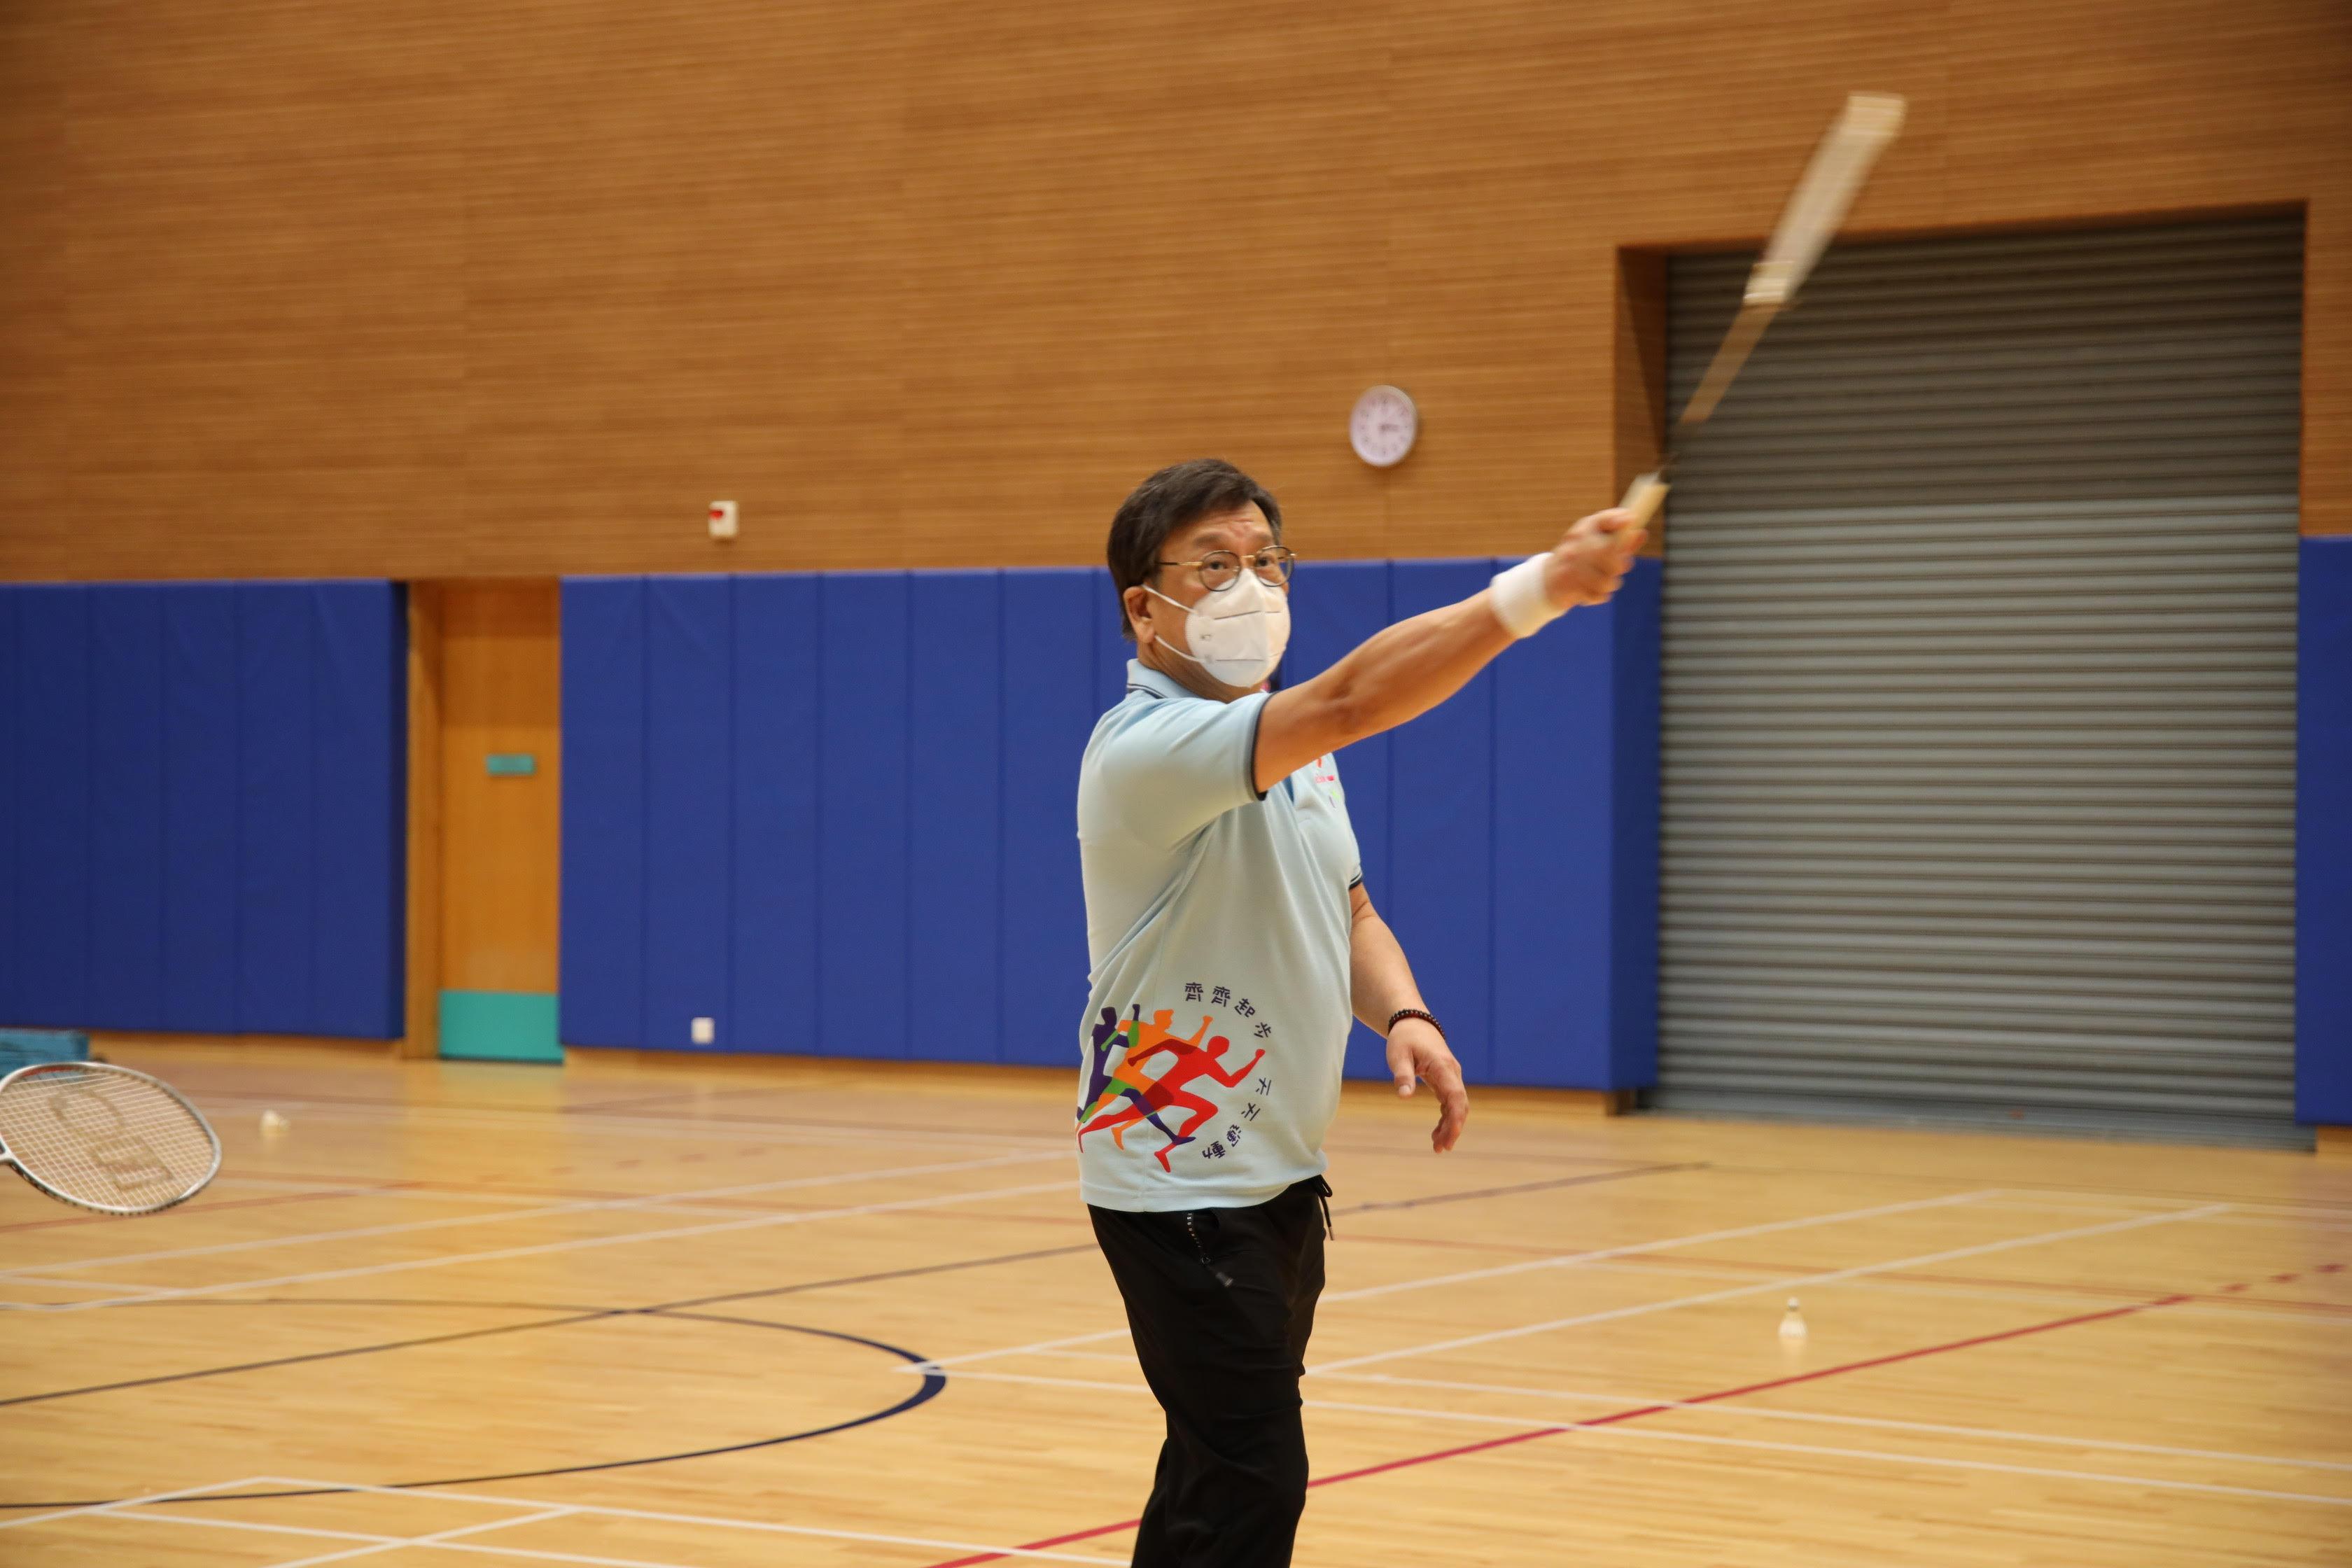 The Secretary for Commerce and Economic Development, Mr Algernon Yau, participated in Sport For All Day 2022 activities organised by the Leisure and Cultural Services Department at Po Kong Village Road Sports Centre today (August 7) to encourage people to engage in regular sports and physical activities. Photo shows Mr Yau participating in a badminton session.